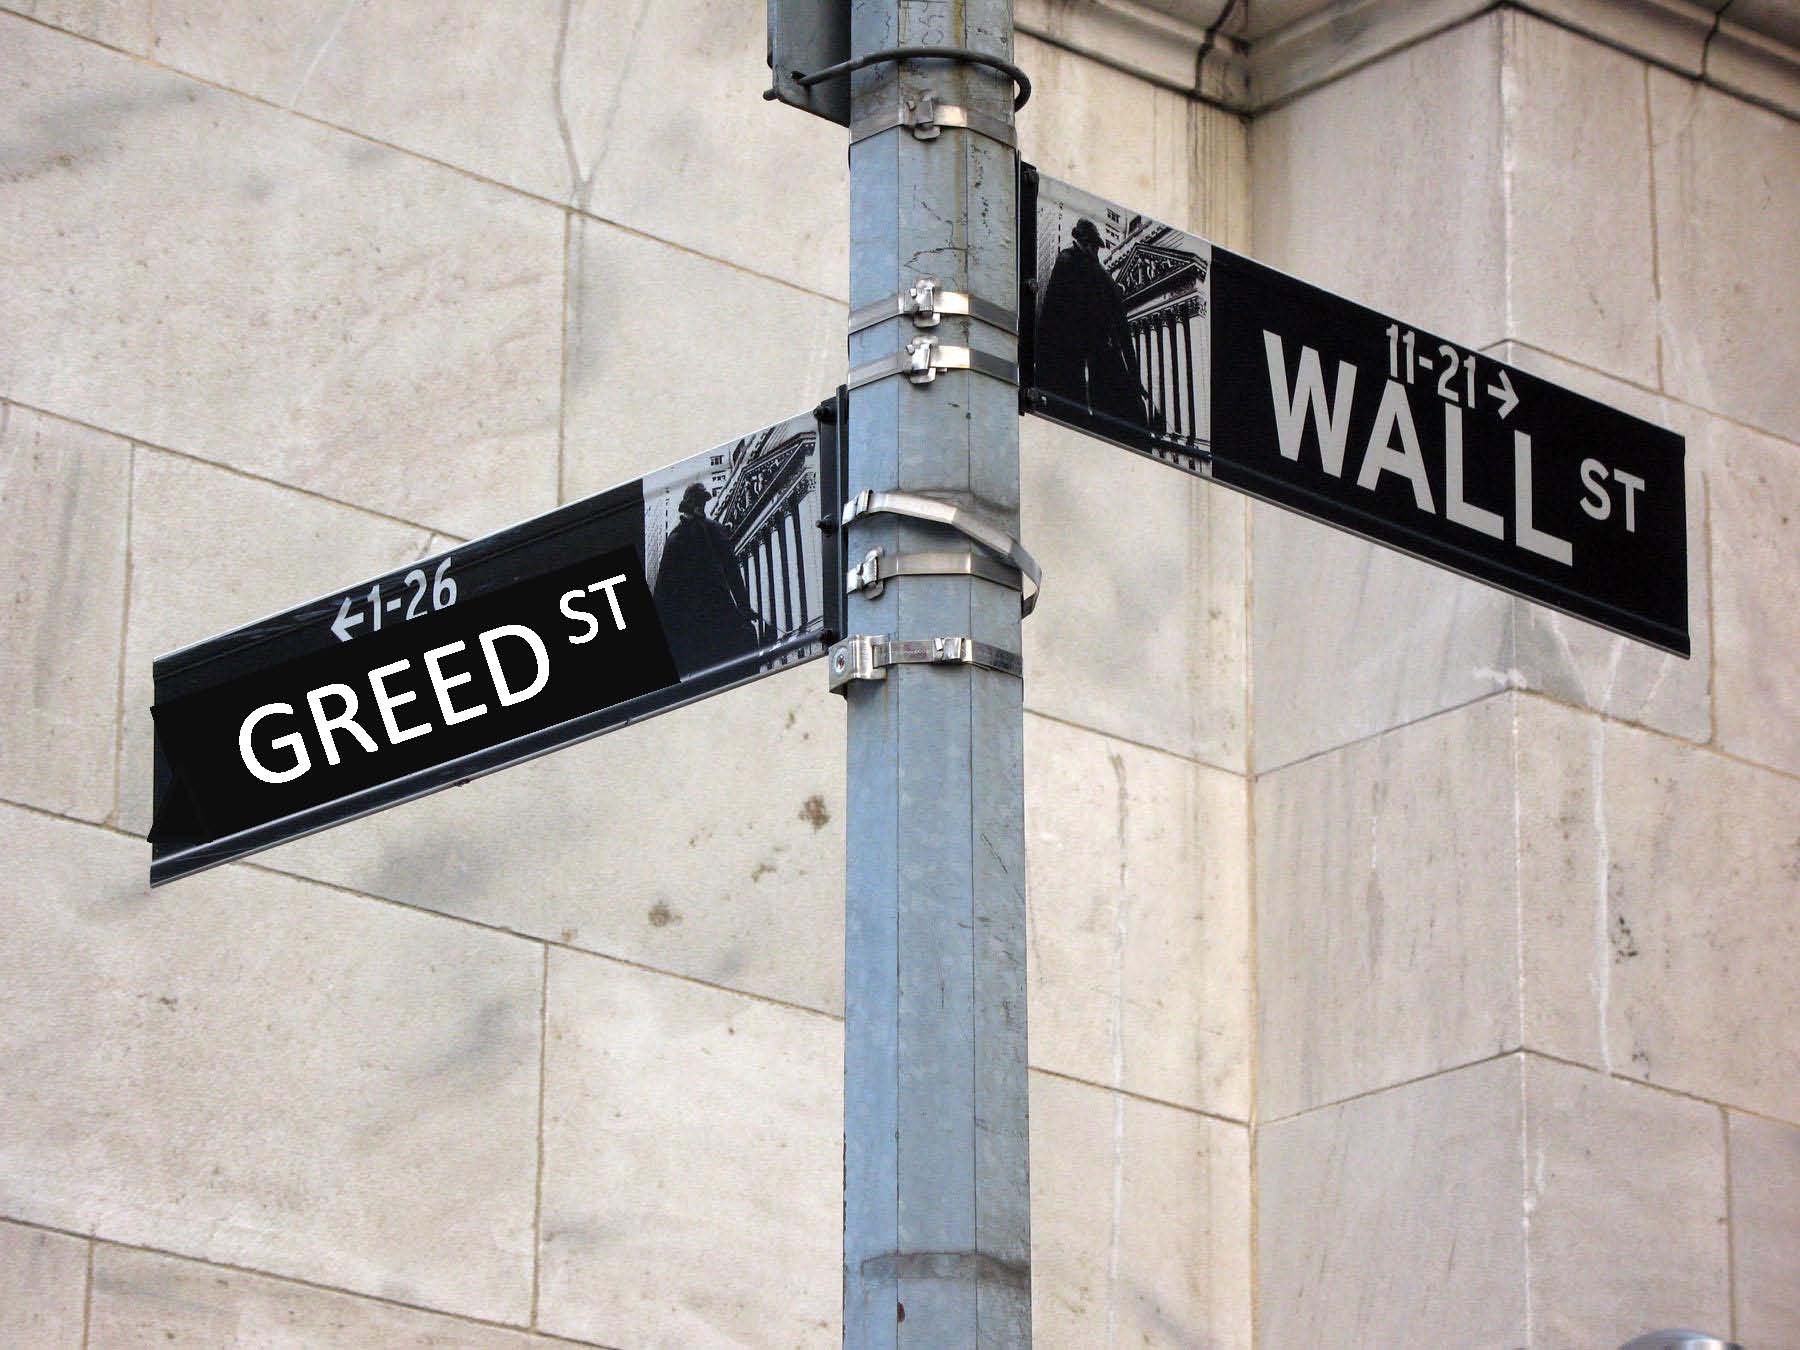 intersection of Wall Street and Greed Street